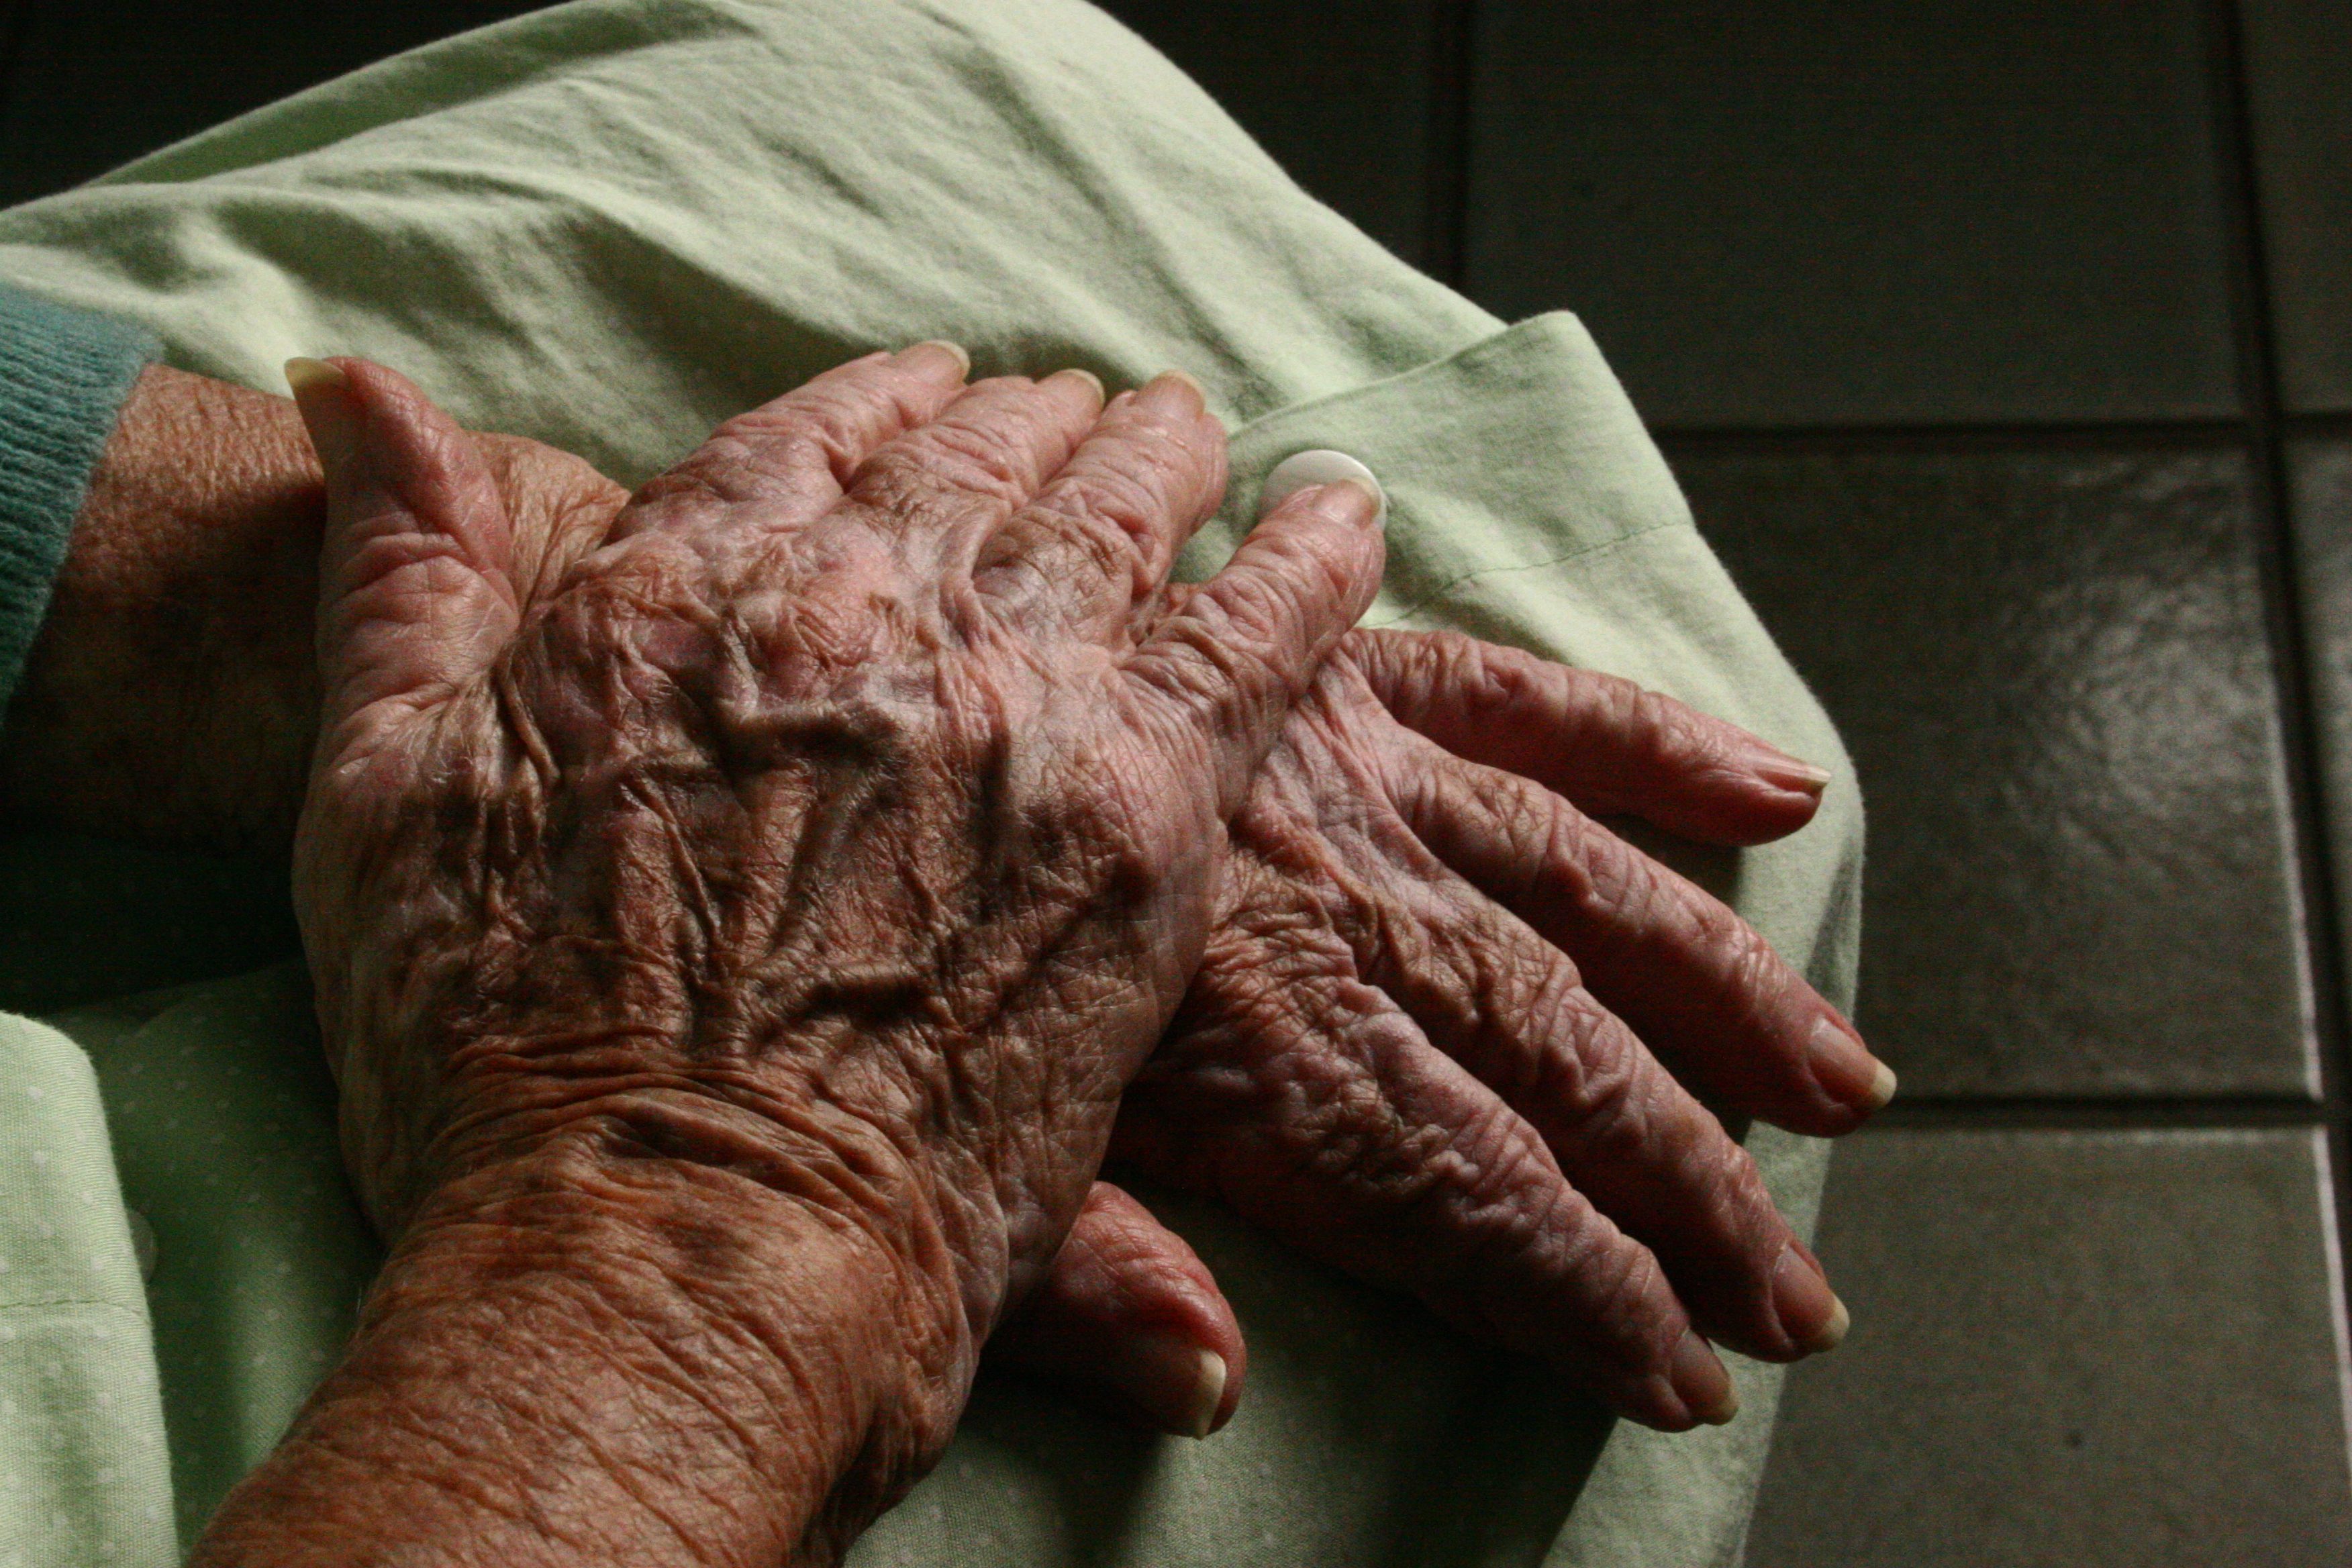 File:Old hands.jpg - Wikimedia Commons